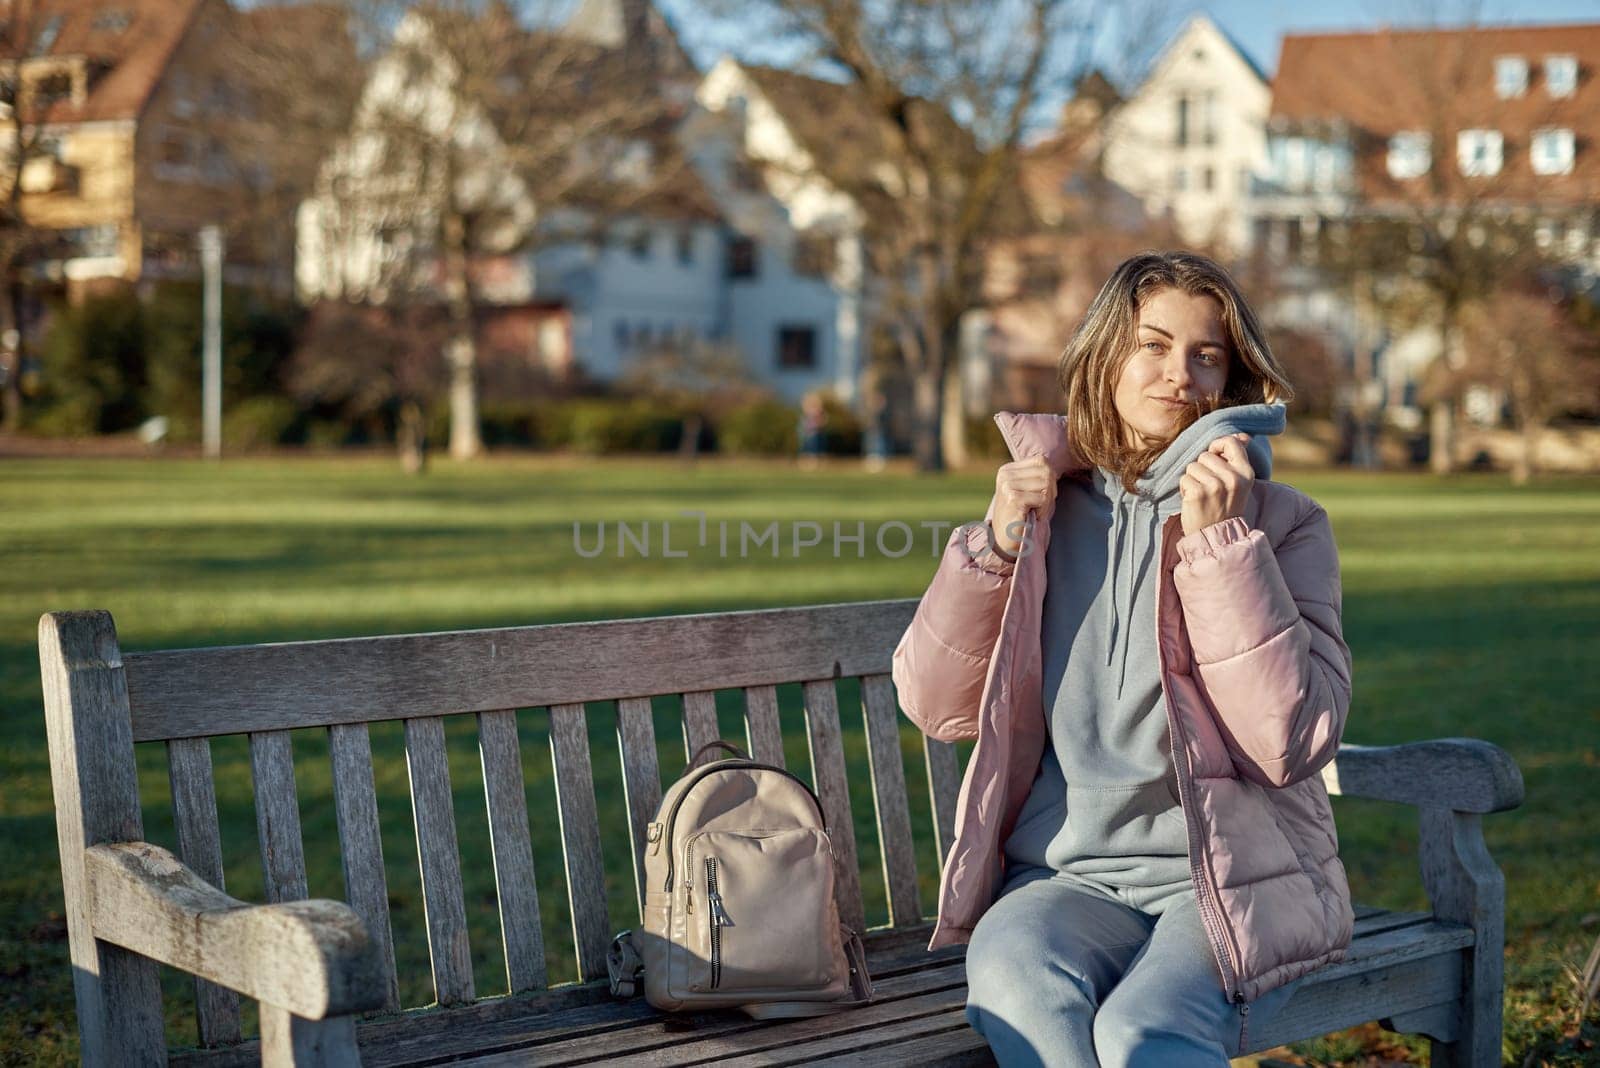 Winter Joy in Bitigheim-Bissingen: Beautiful Girl in Pink Jacket Sitting Amidst Half-Timbered Charm. beautiful girl in a pink winter jacket sitting on a bench in a park, set against the backdrop of the historic town of Bitigheim-Bissingen, Baden-Wurttemberg, Germany. by Andrii_Ko